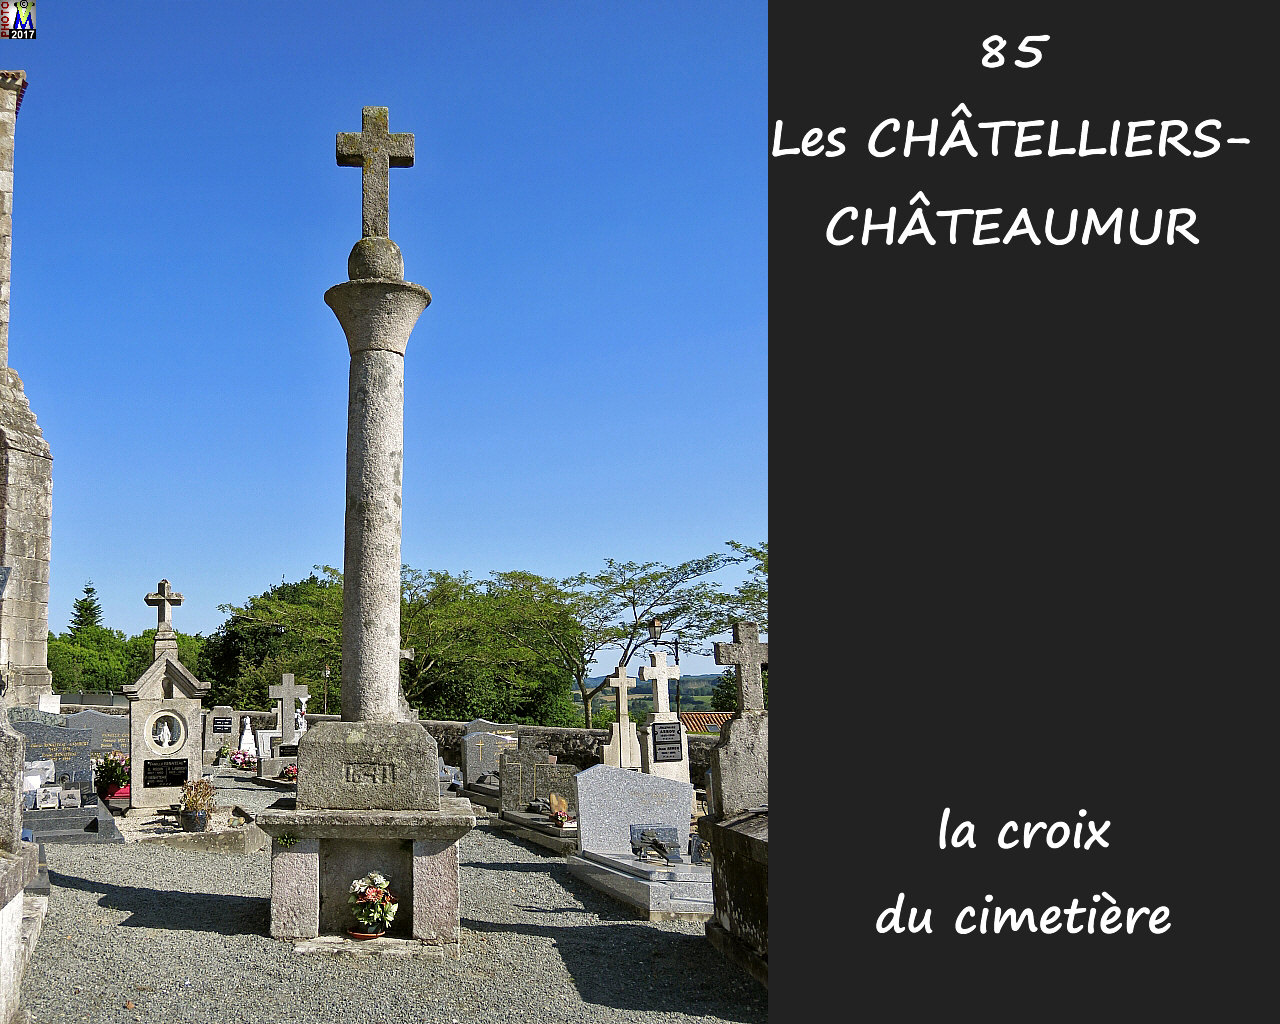 85CHATELLIERS-CHATEAUMUR_croix_1020.jpg